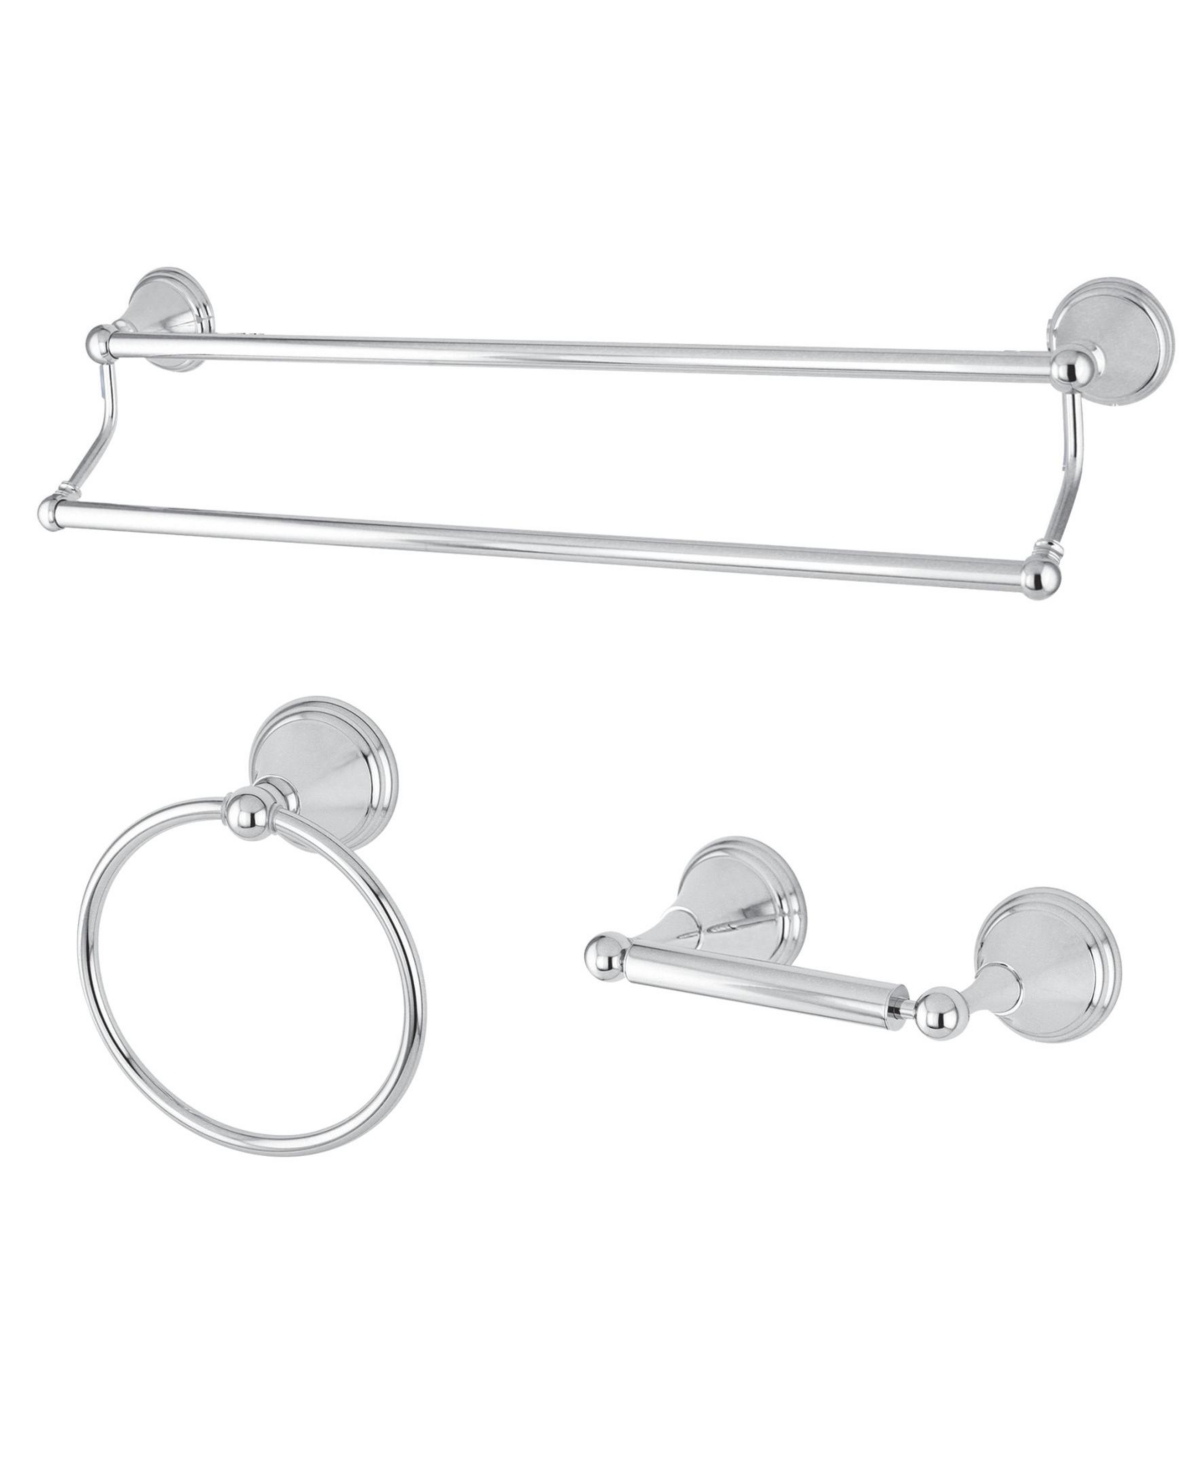 Kingston Brass Governor 3-Pc. Bathroom Accessories Set in Polished Chrome Bedding